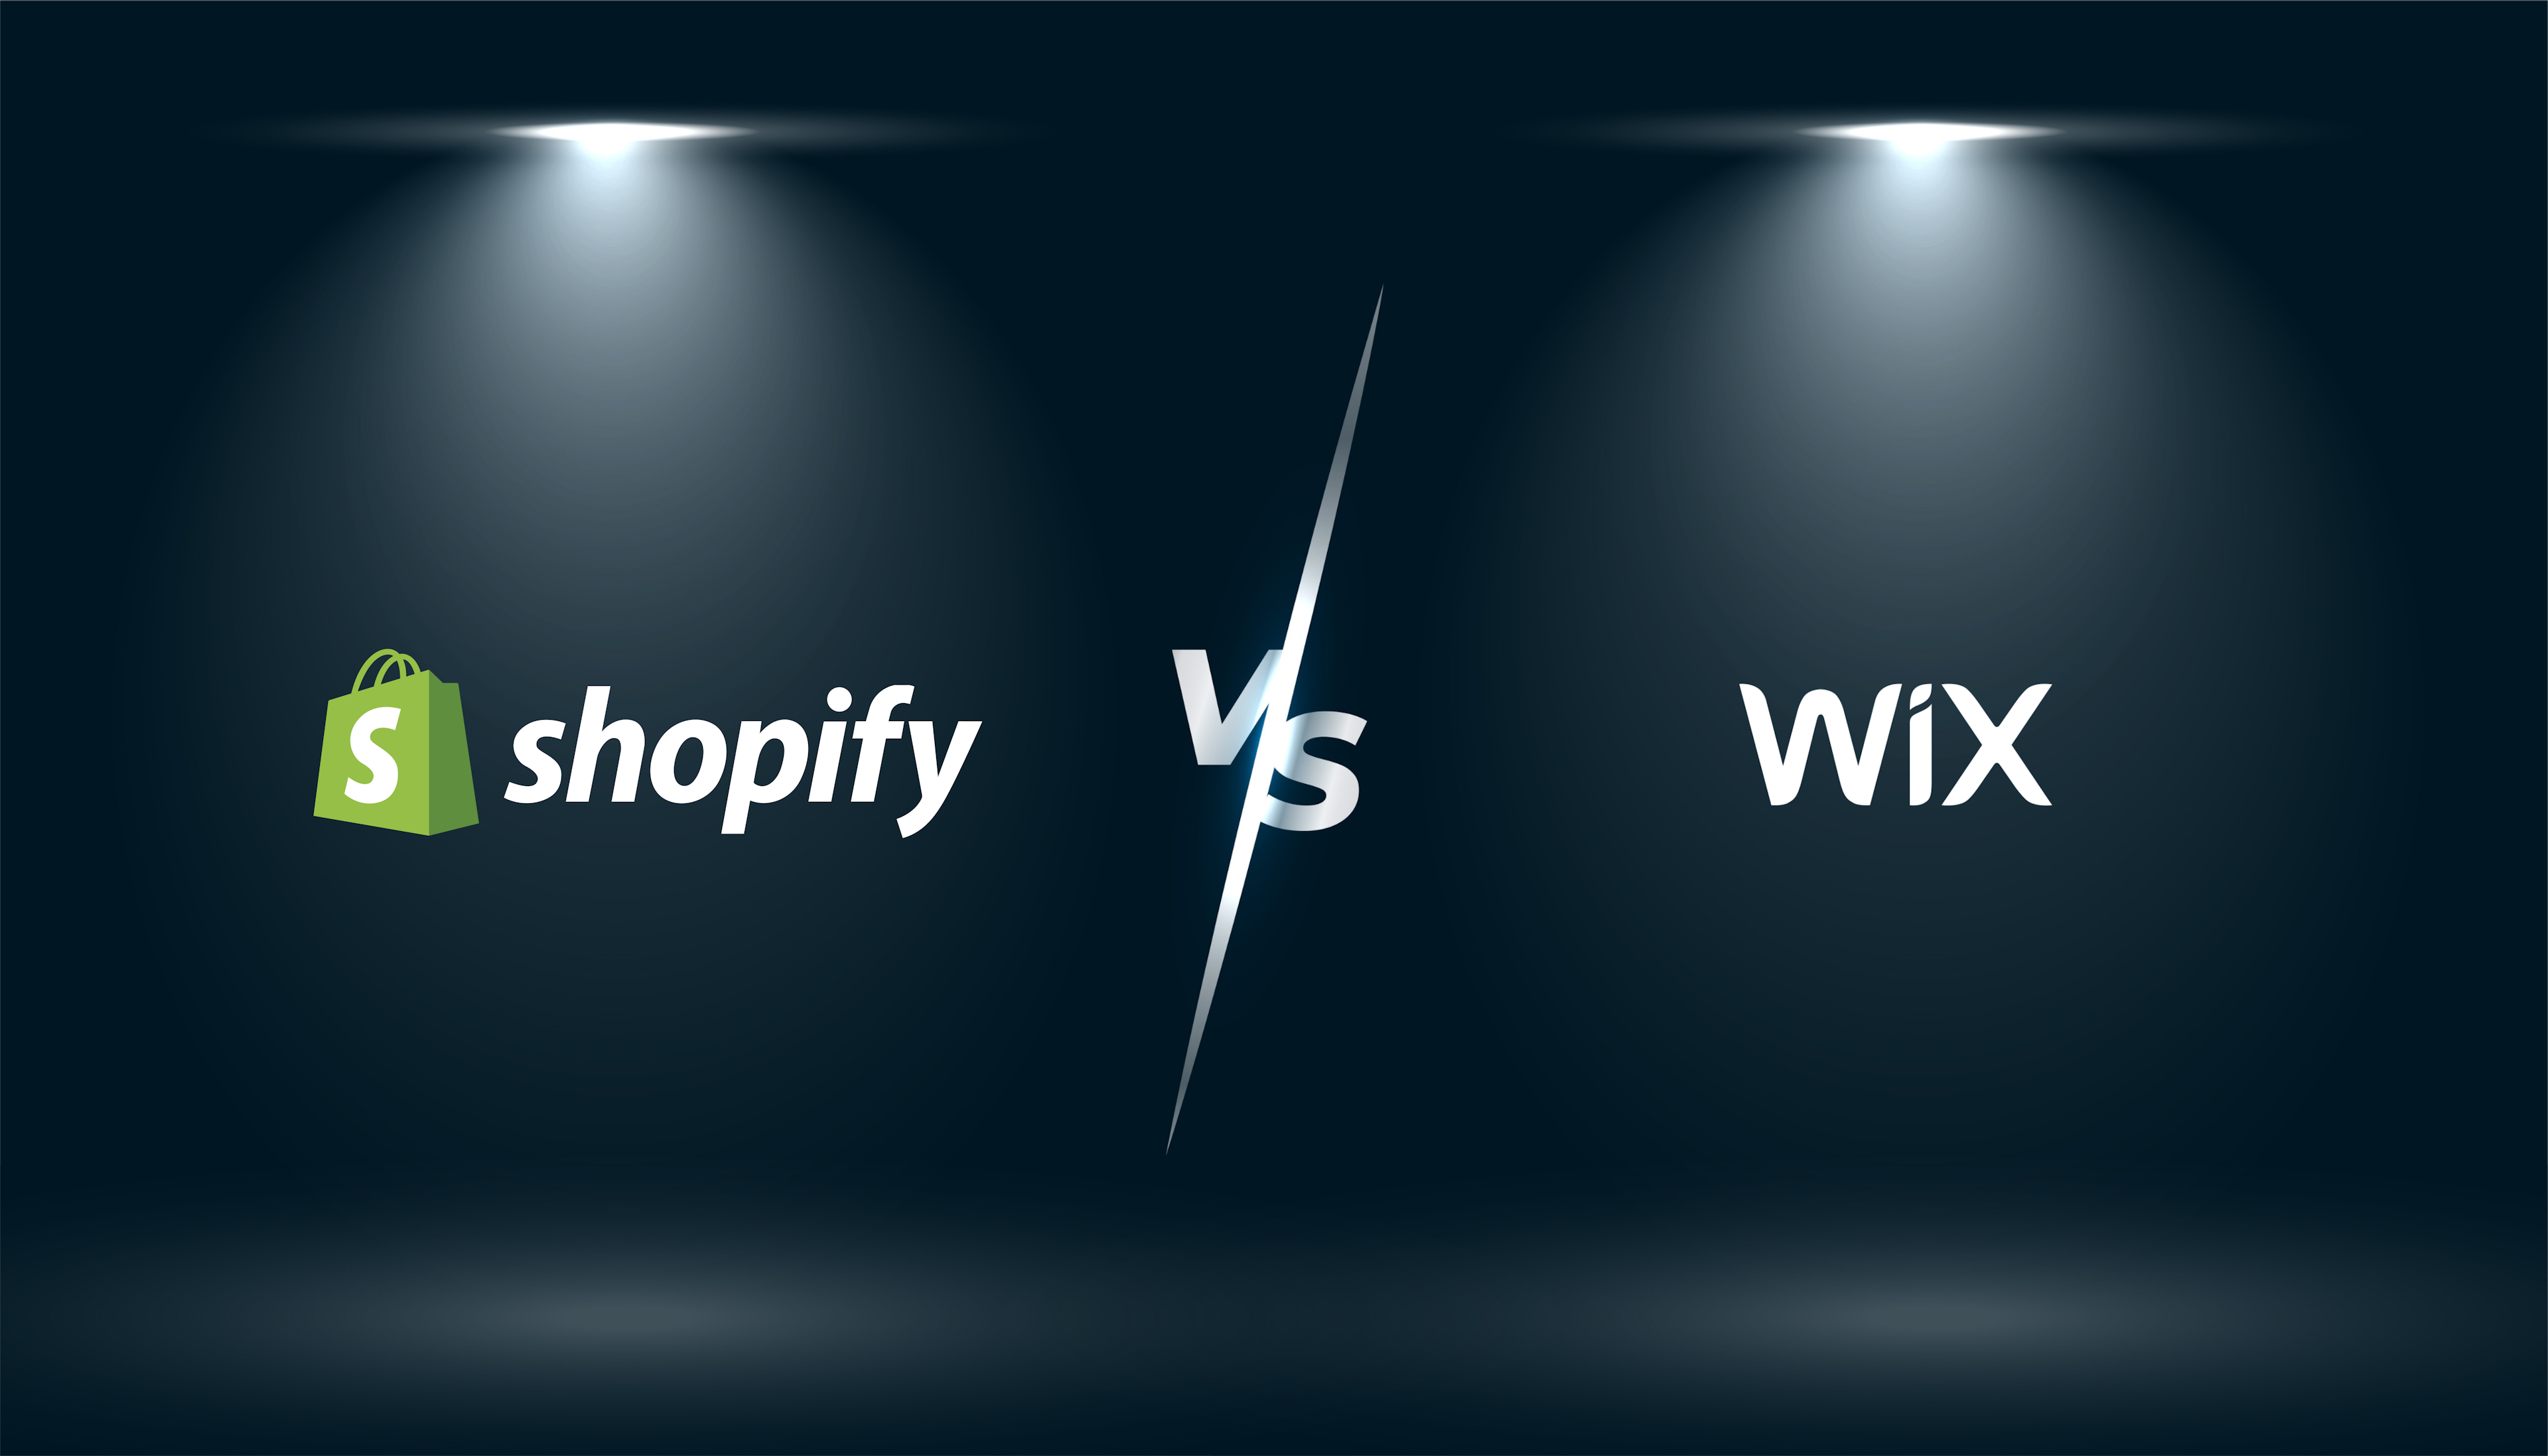 Dark background spotlighted on Shopify VS Wix with a VS emblem in the middle of the image and Shopify on the left and WIX on the right